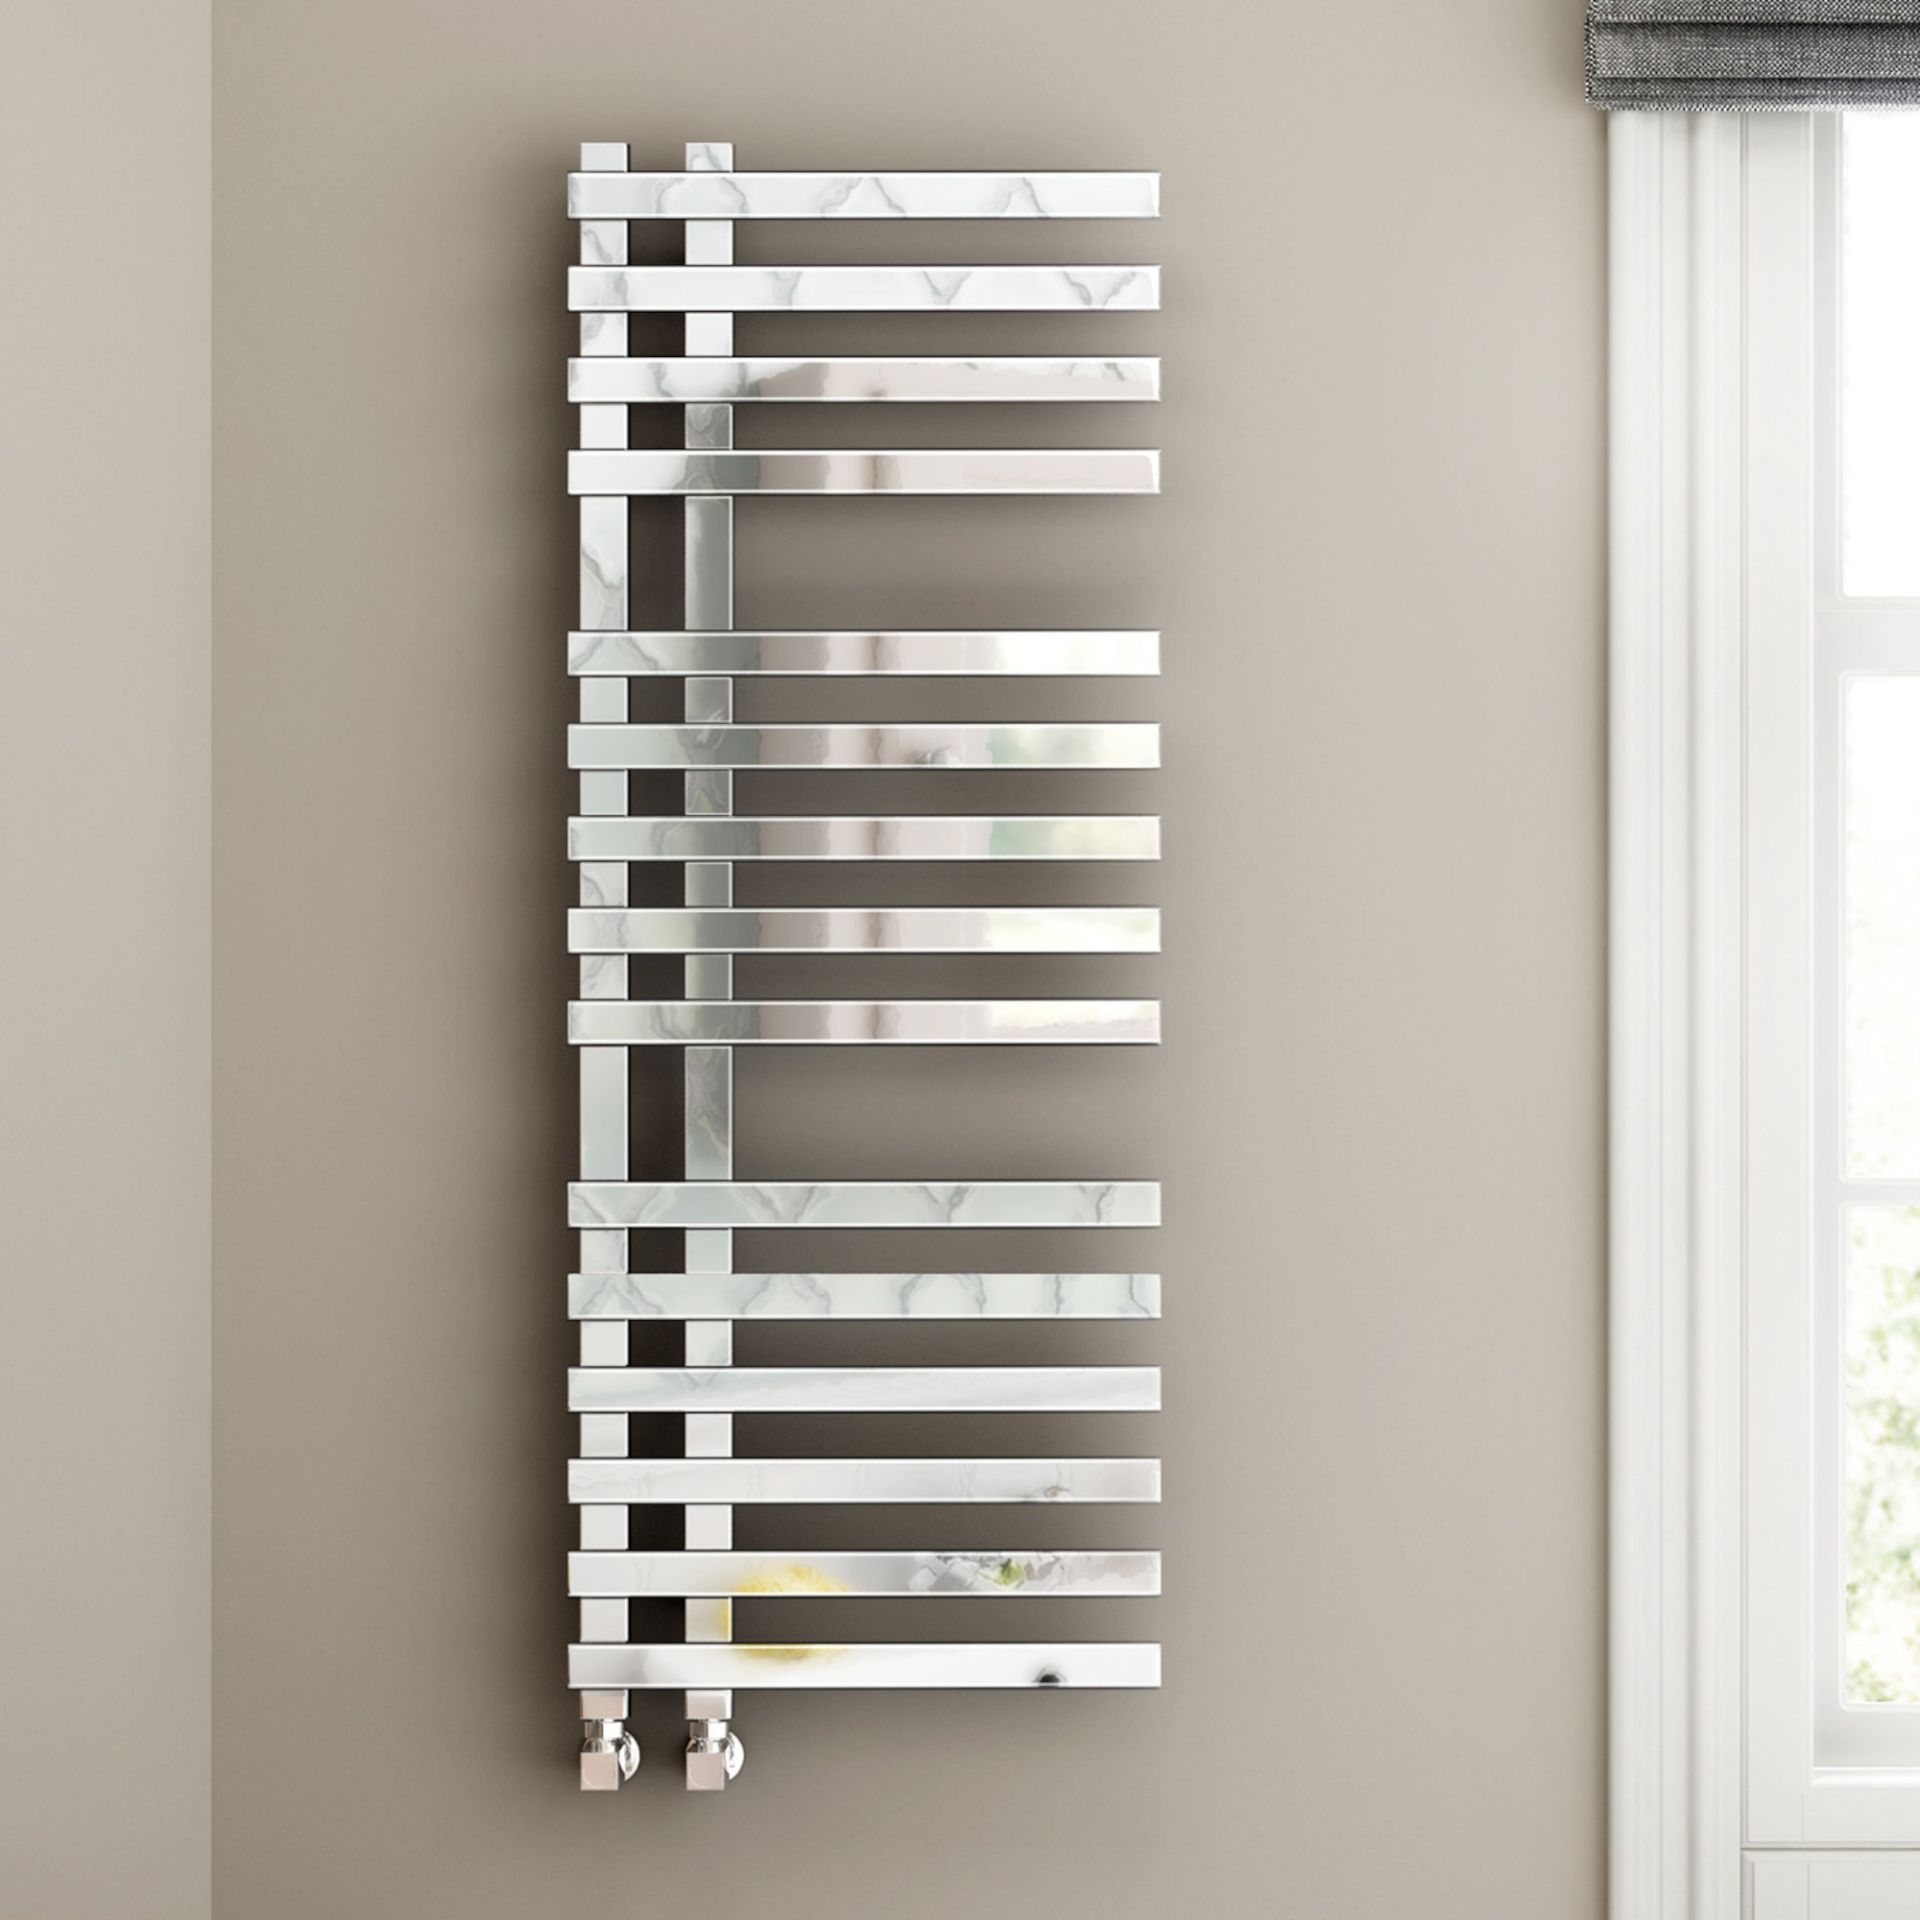 (SA48) 1200x450mm Chrome Designer Towel Radiator -Square Rail. RRP £405.99. This product can also be